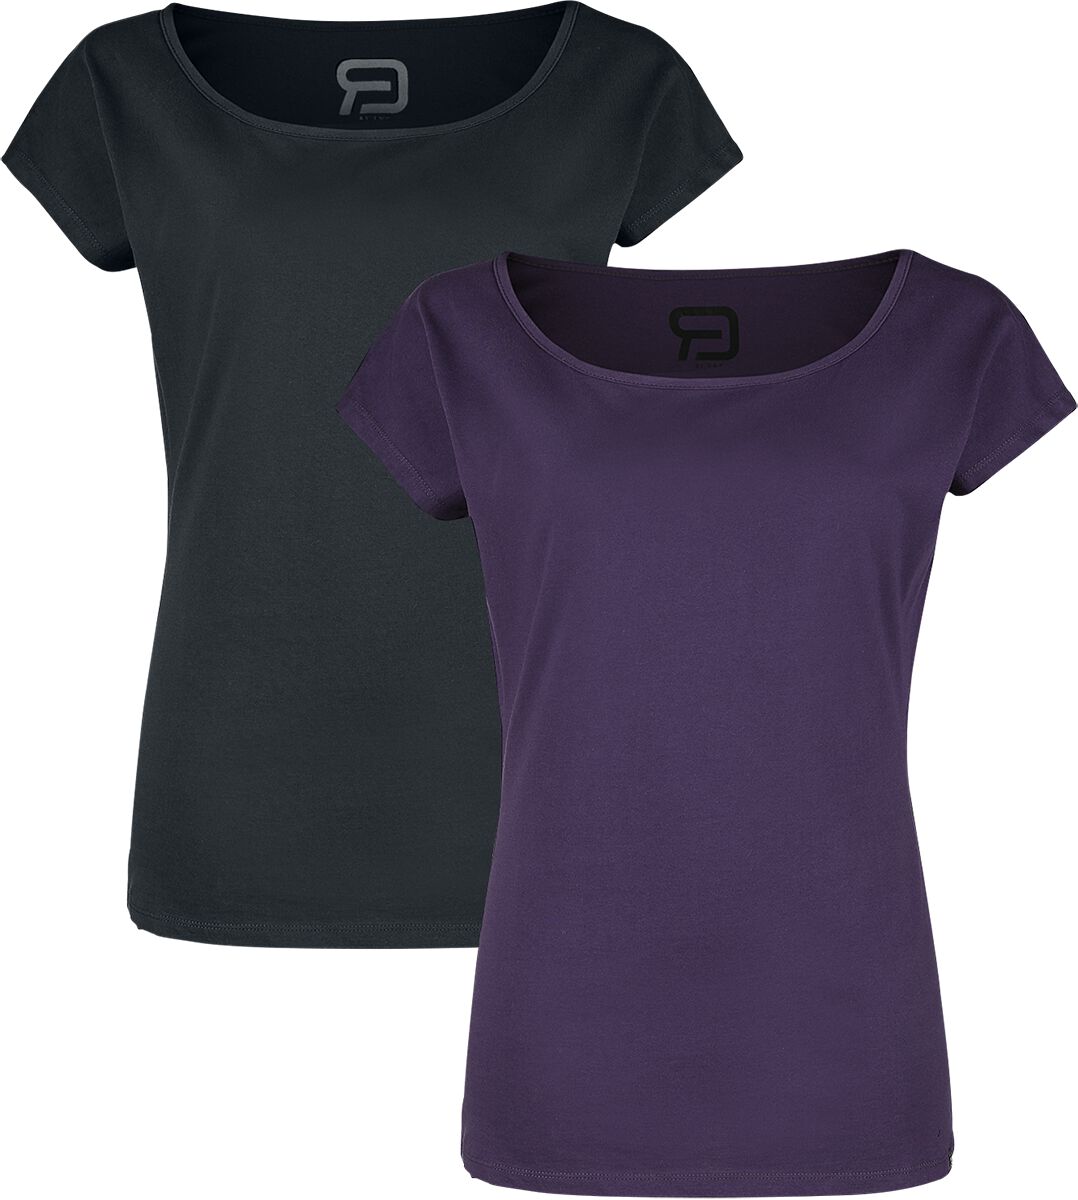 Image of T-Shirt di RED by EMP - Double Pack of Crew-Neck T-Shirts - S a 5XL - Donna - nero/viola